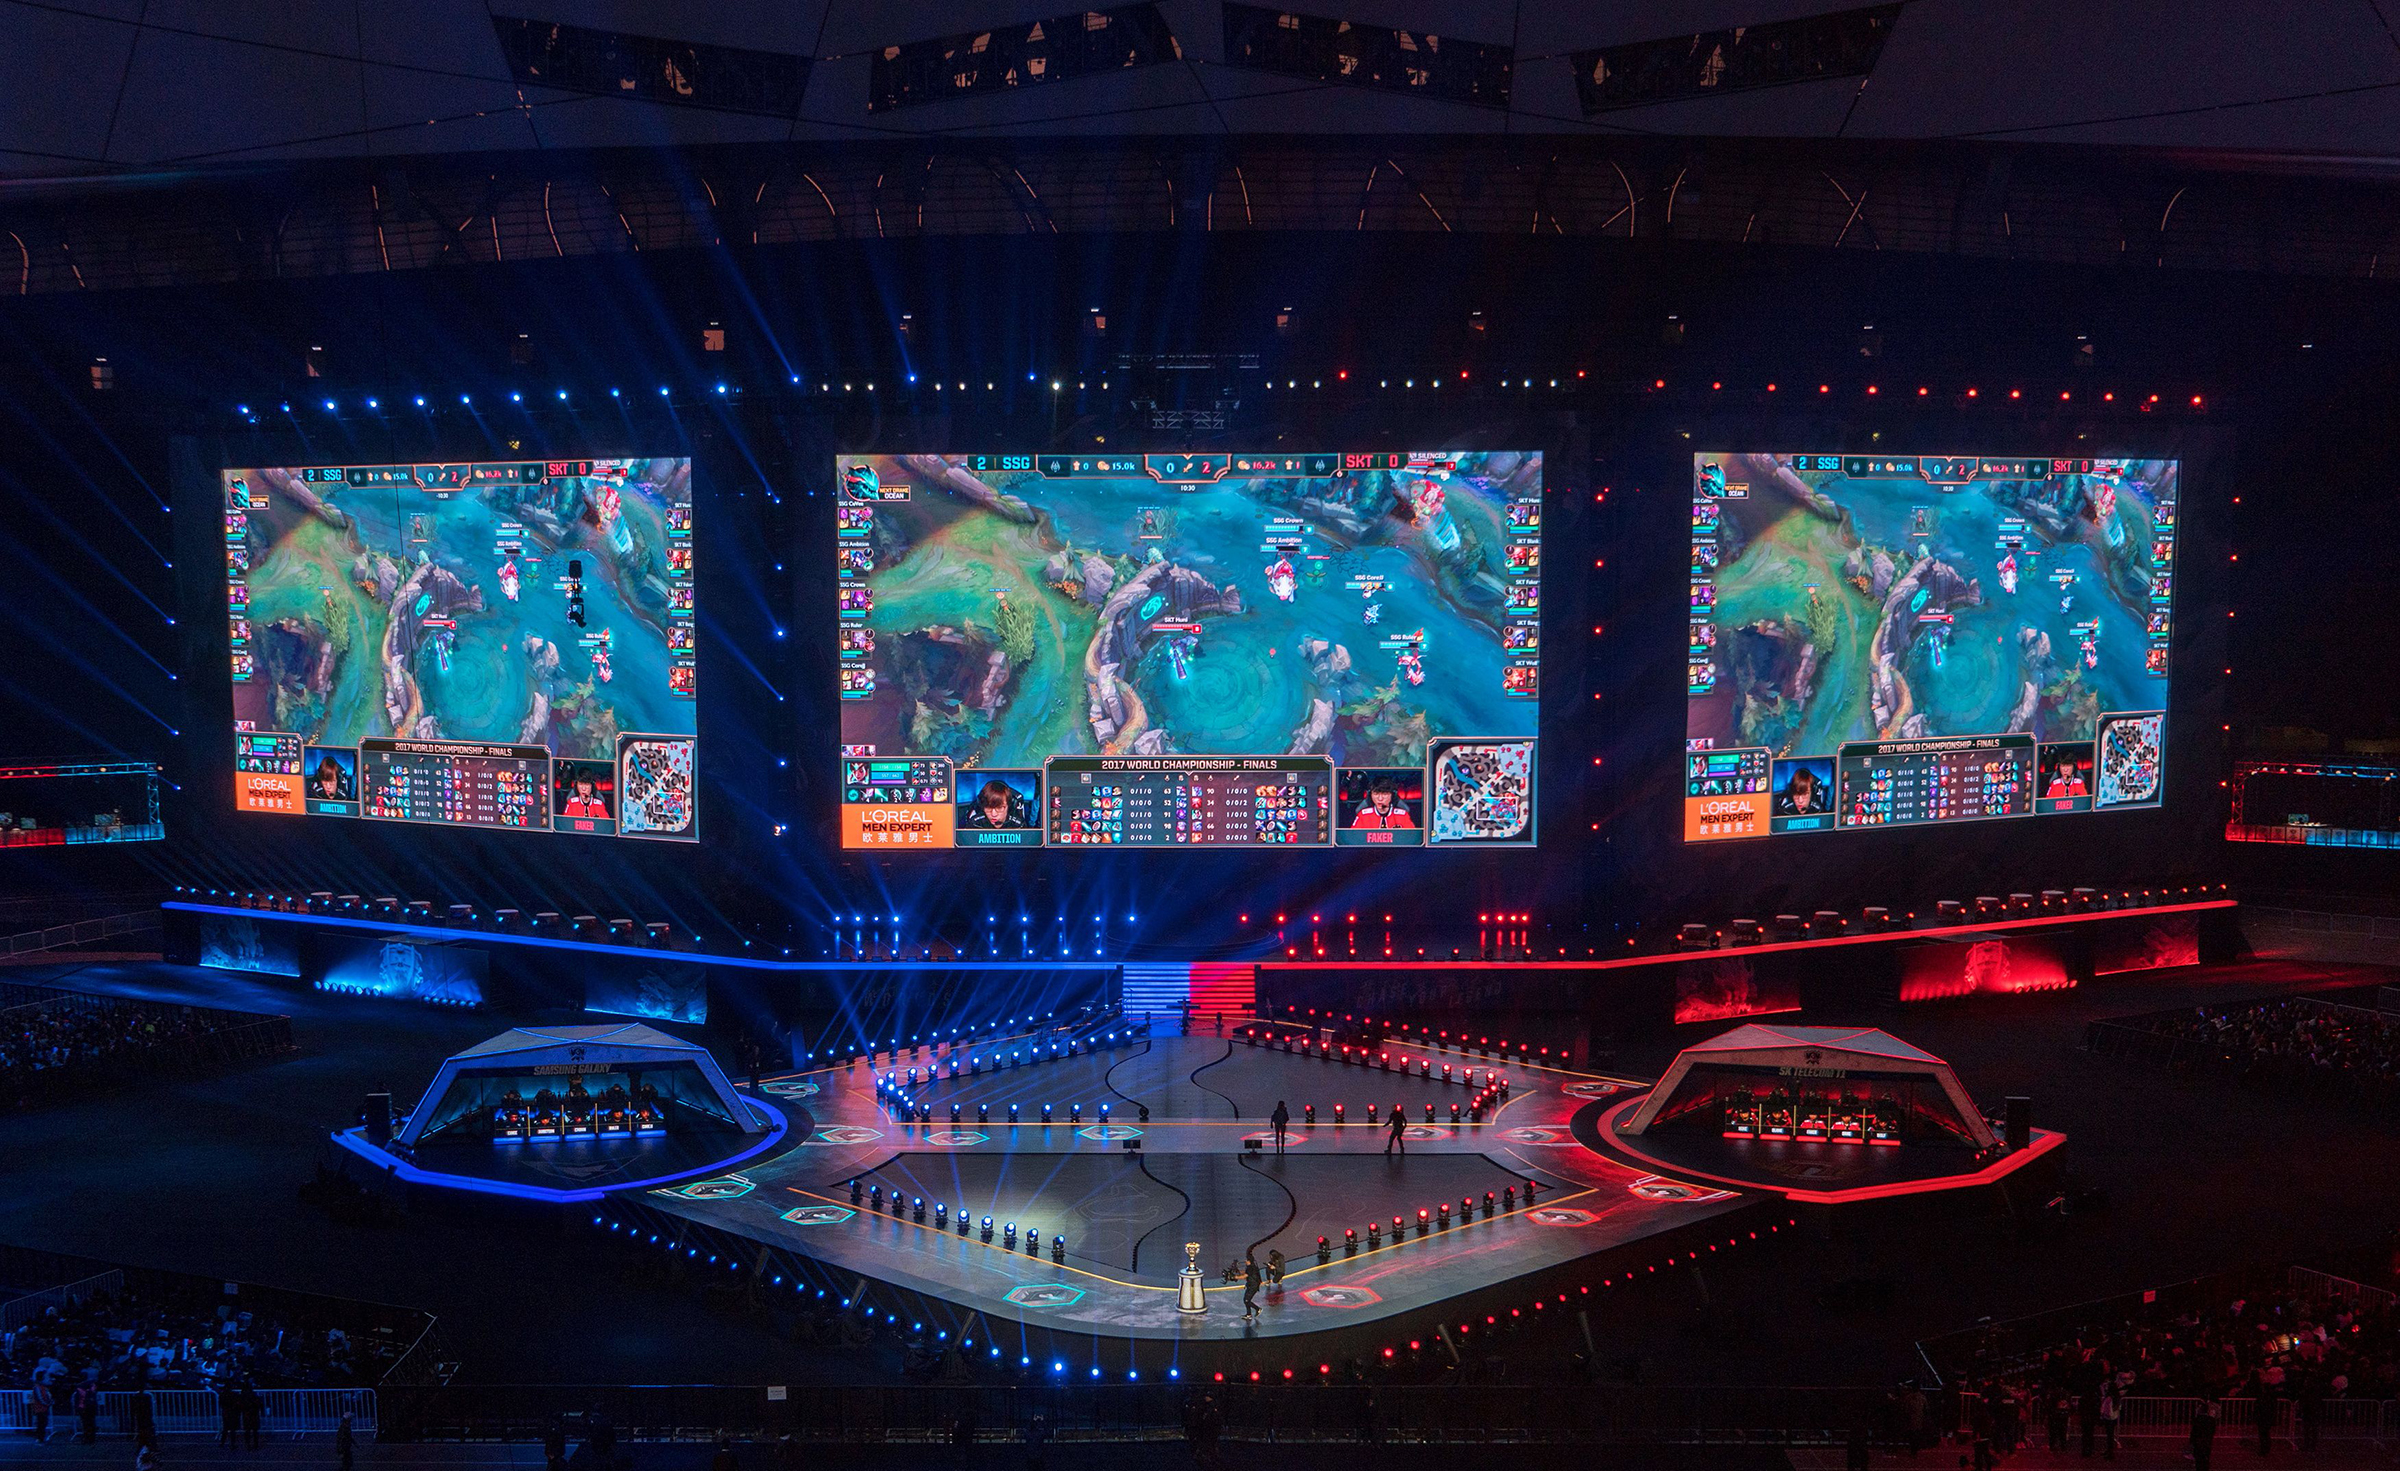 The scene at the World Championships Final of League of Legends at the Bird's Nest in Beijing on November 4, 2017